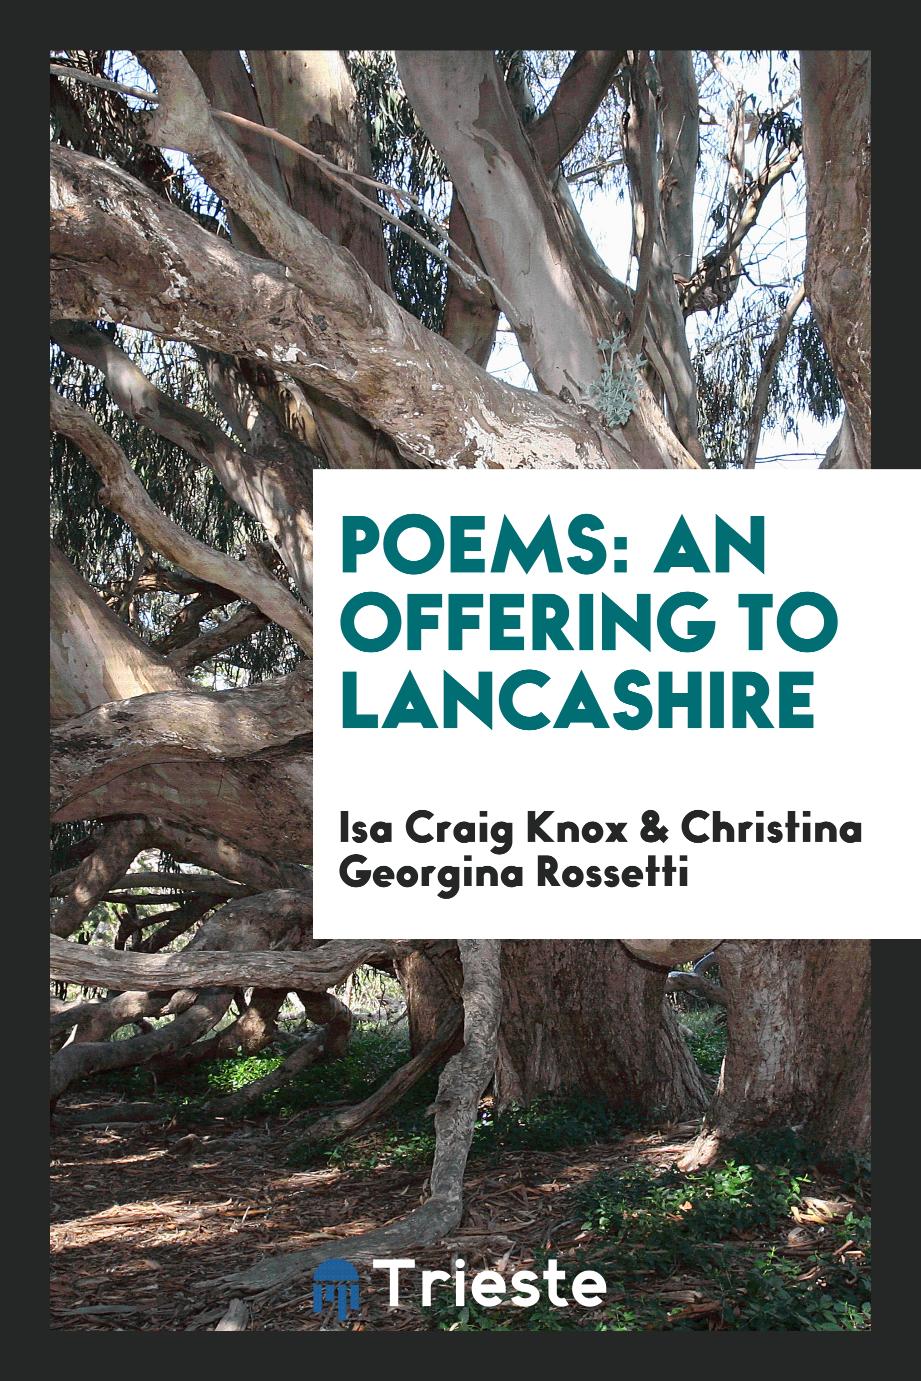 Poems: an offering to Lancashire